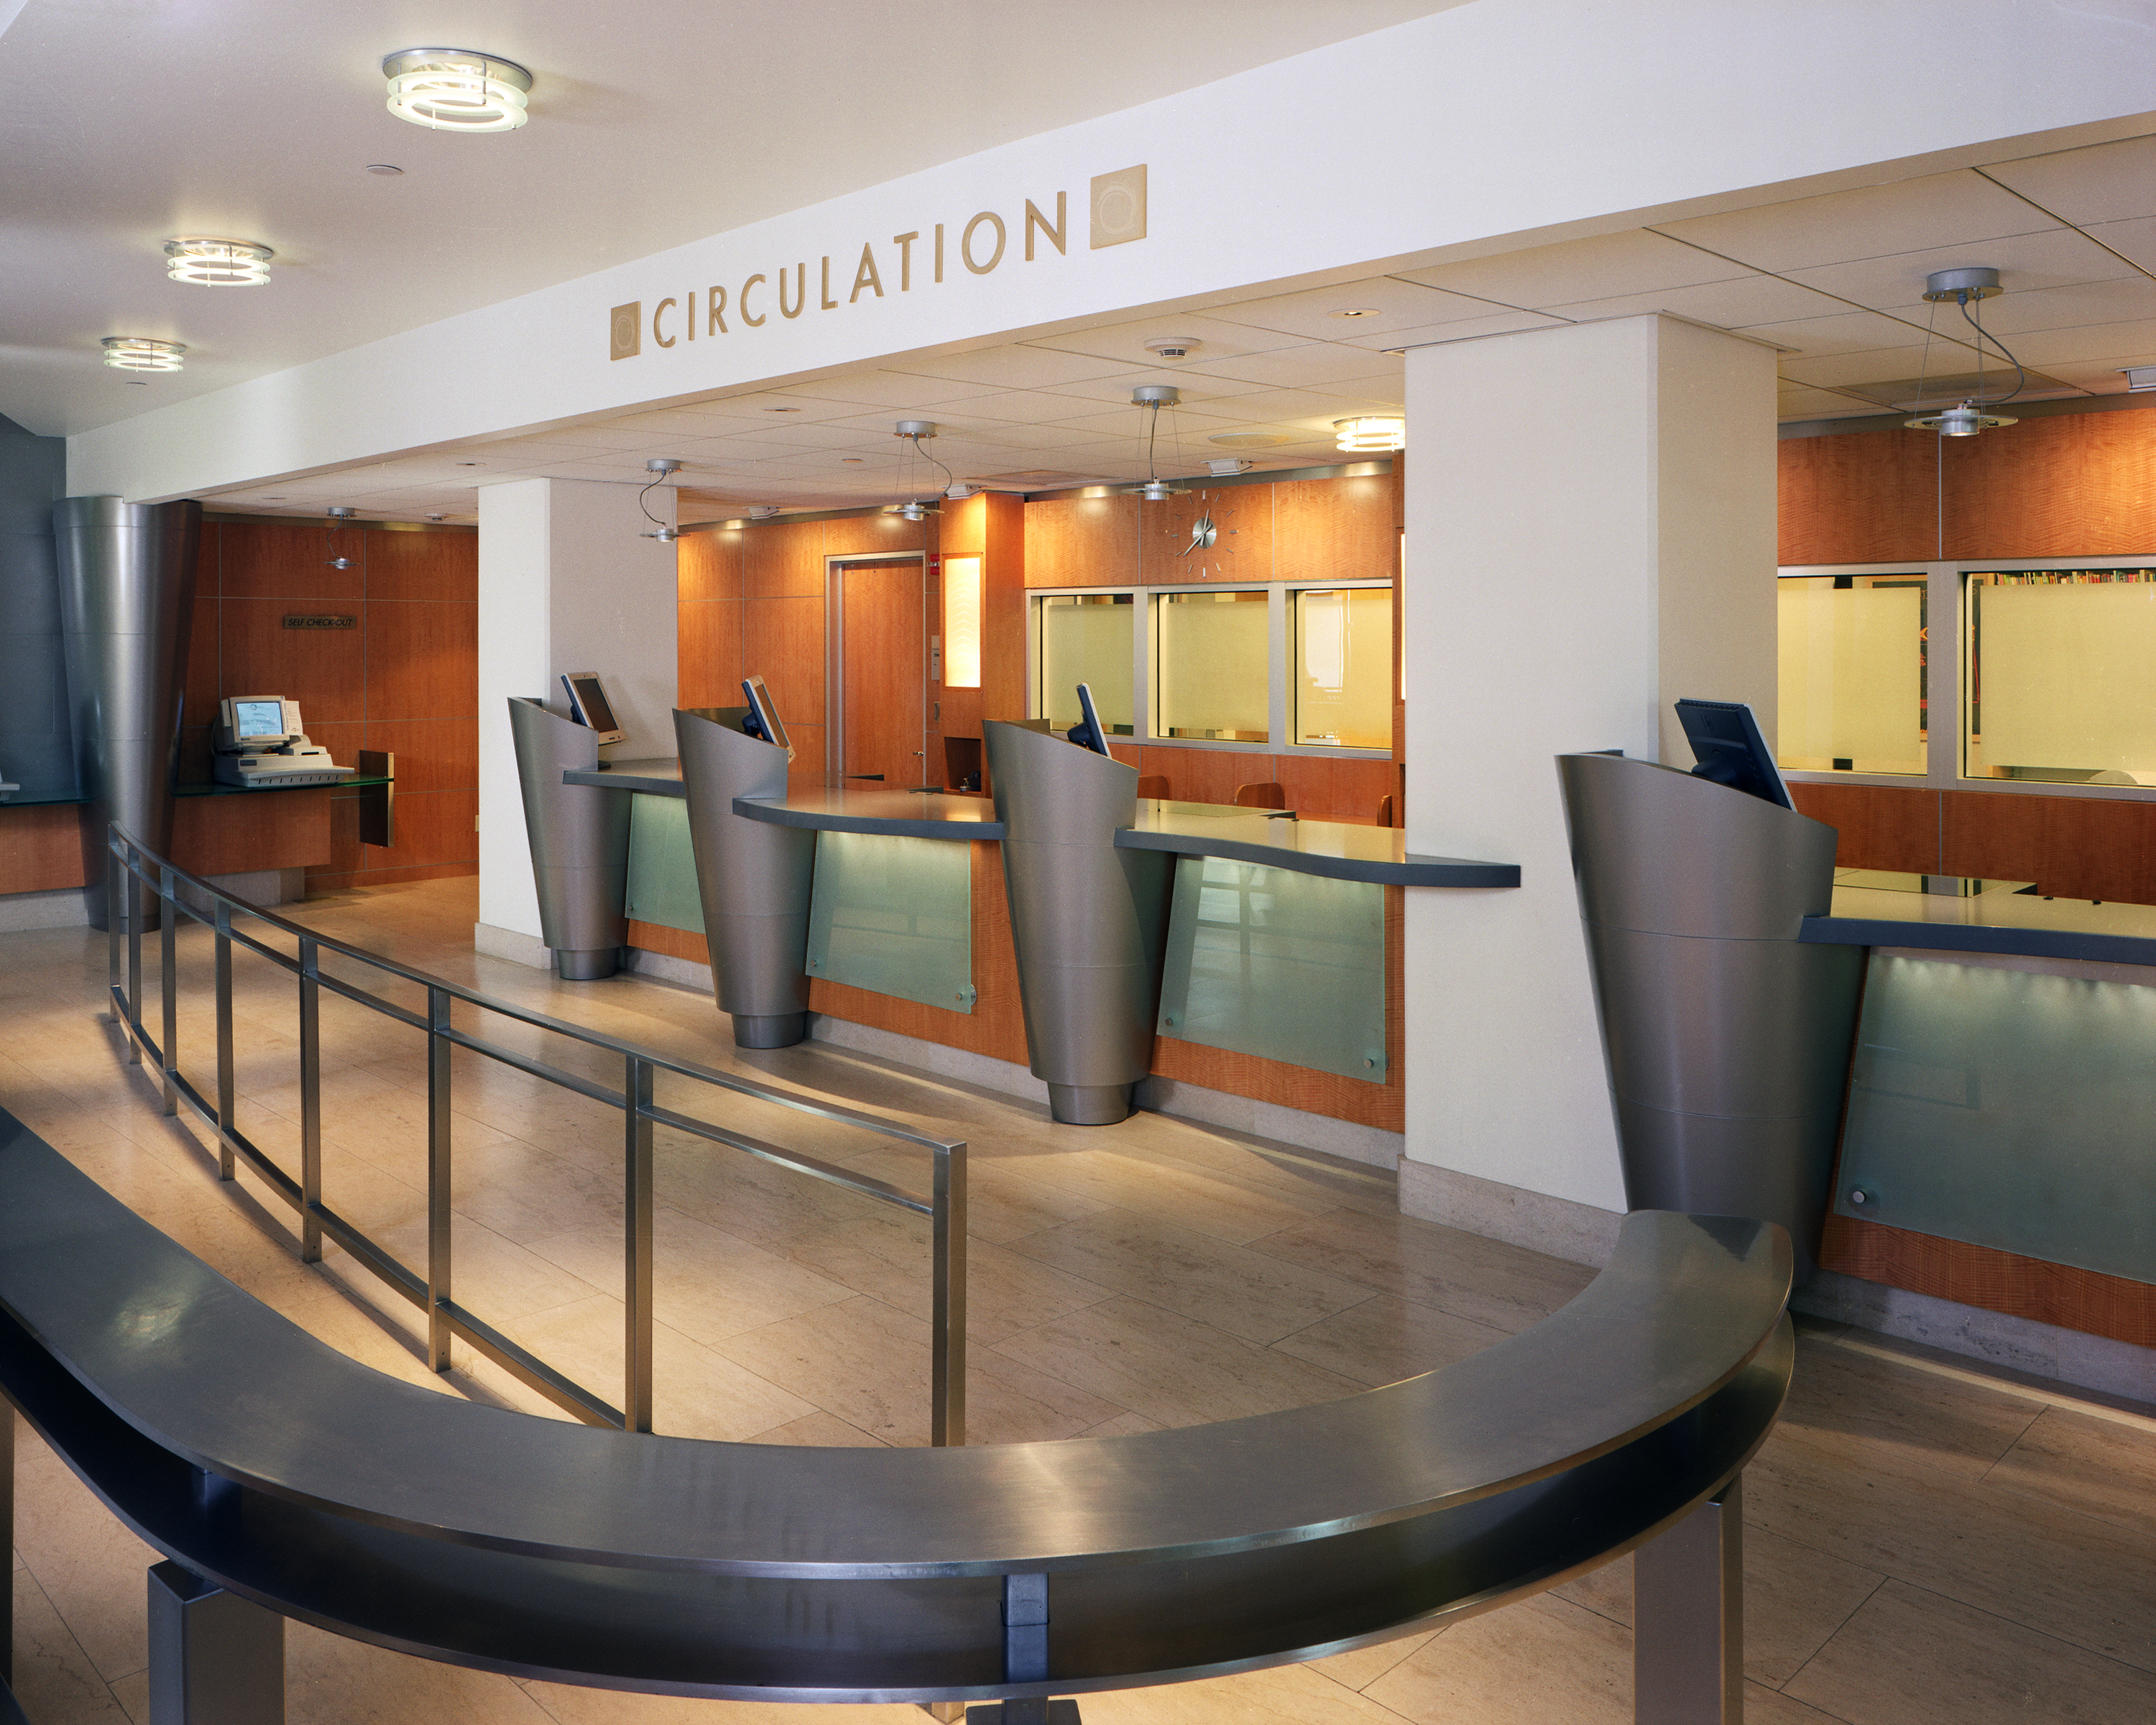 Image of the Circulation Desk